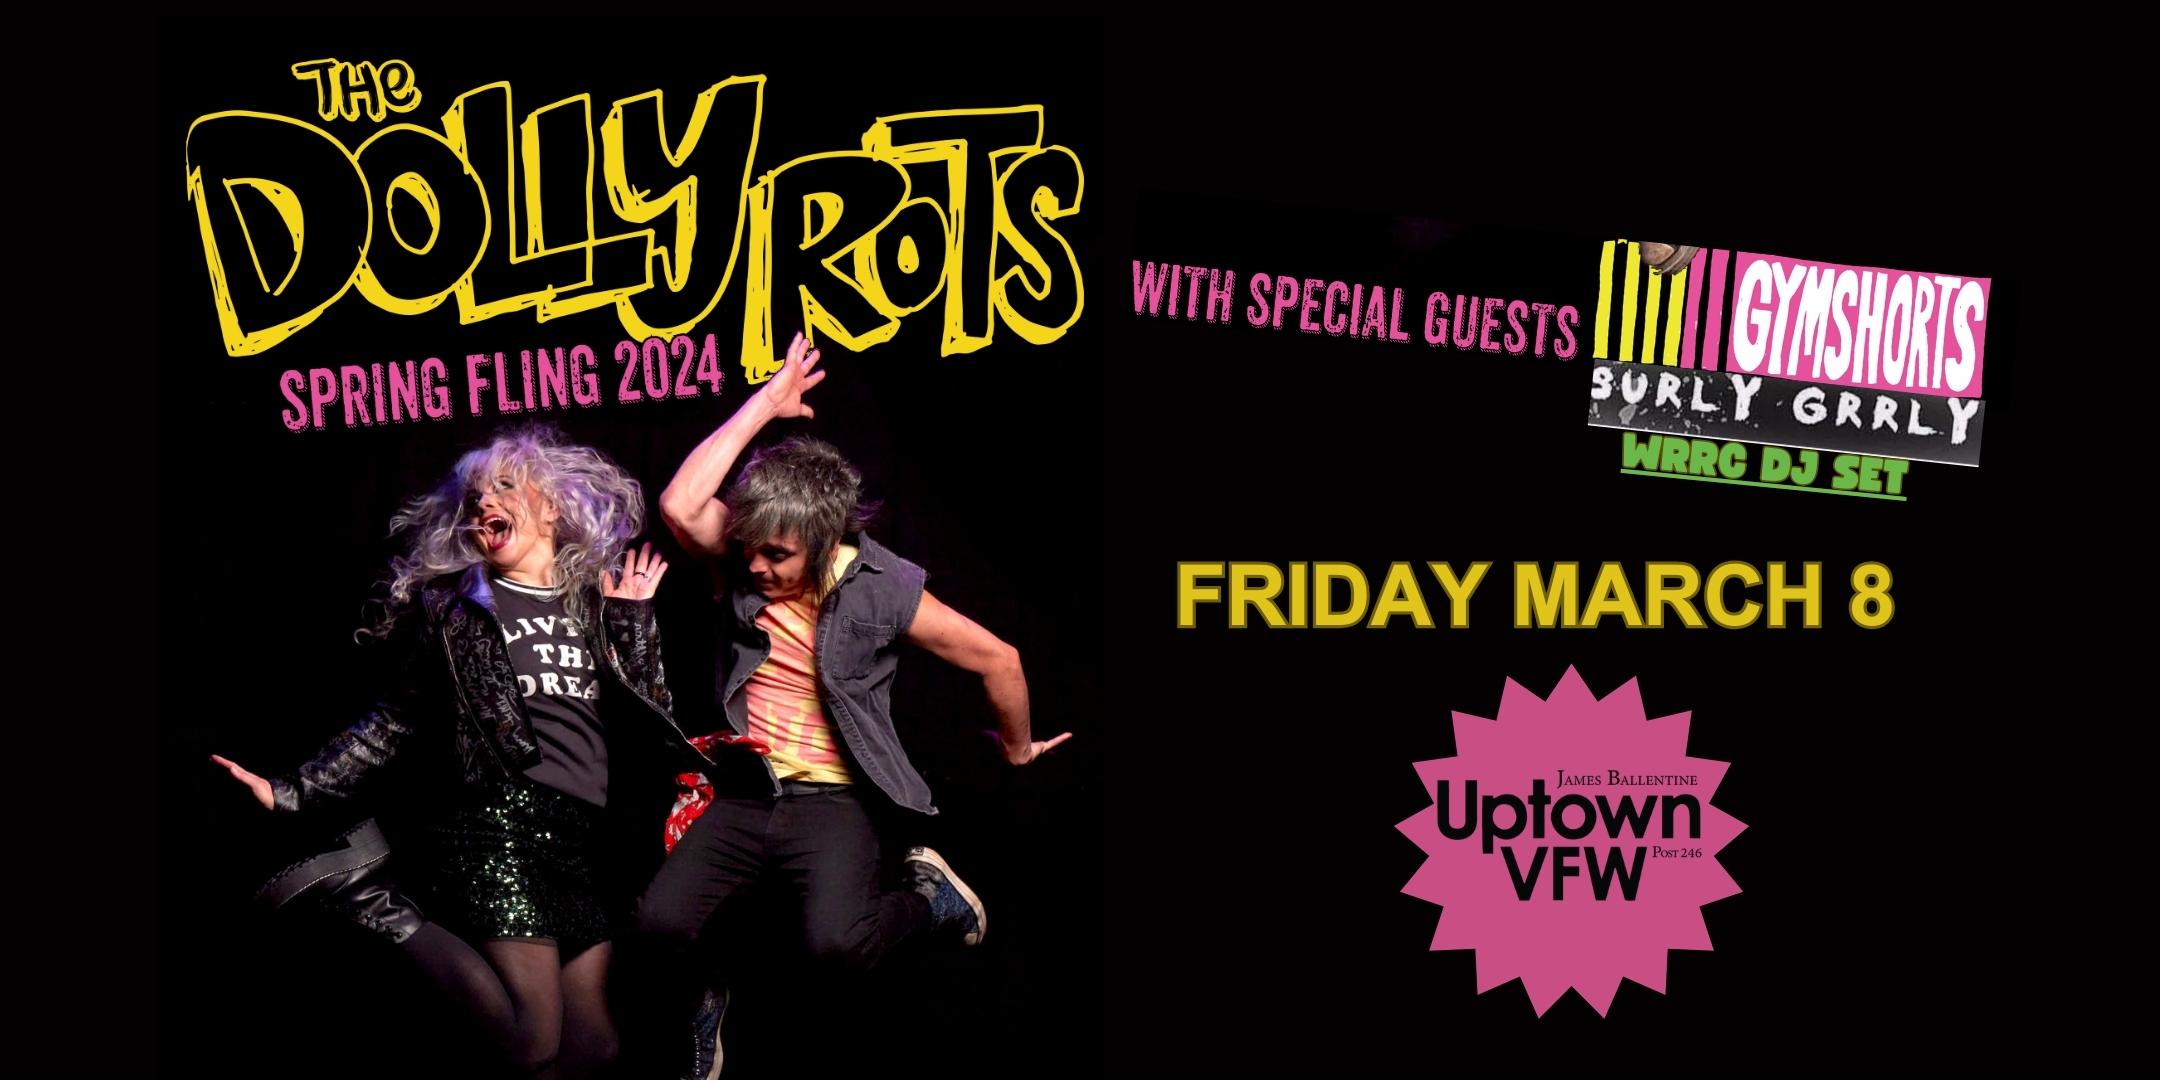 Spring Fling 2024 Tour The Dollyrots with special guests Gymshorts Surly Grrly DJ WRRC Friday, March 8 James Ballentine "Uptown" VFW Post 246 Doors 8:00pm :: Music 8:30pm :: 21+ GA $20 ADV / $25 DOS NO REFUNDS